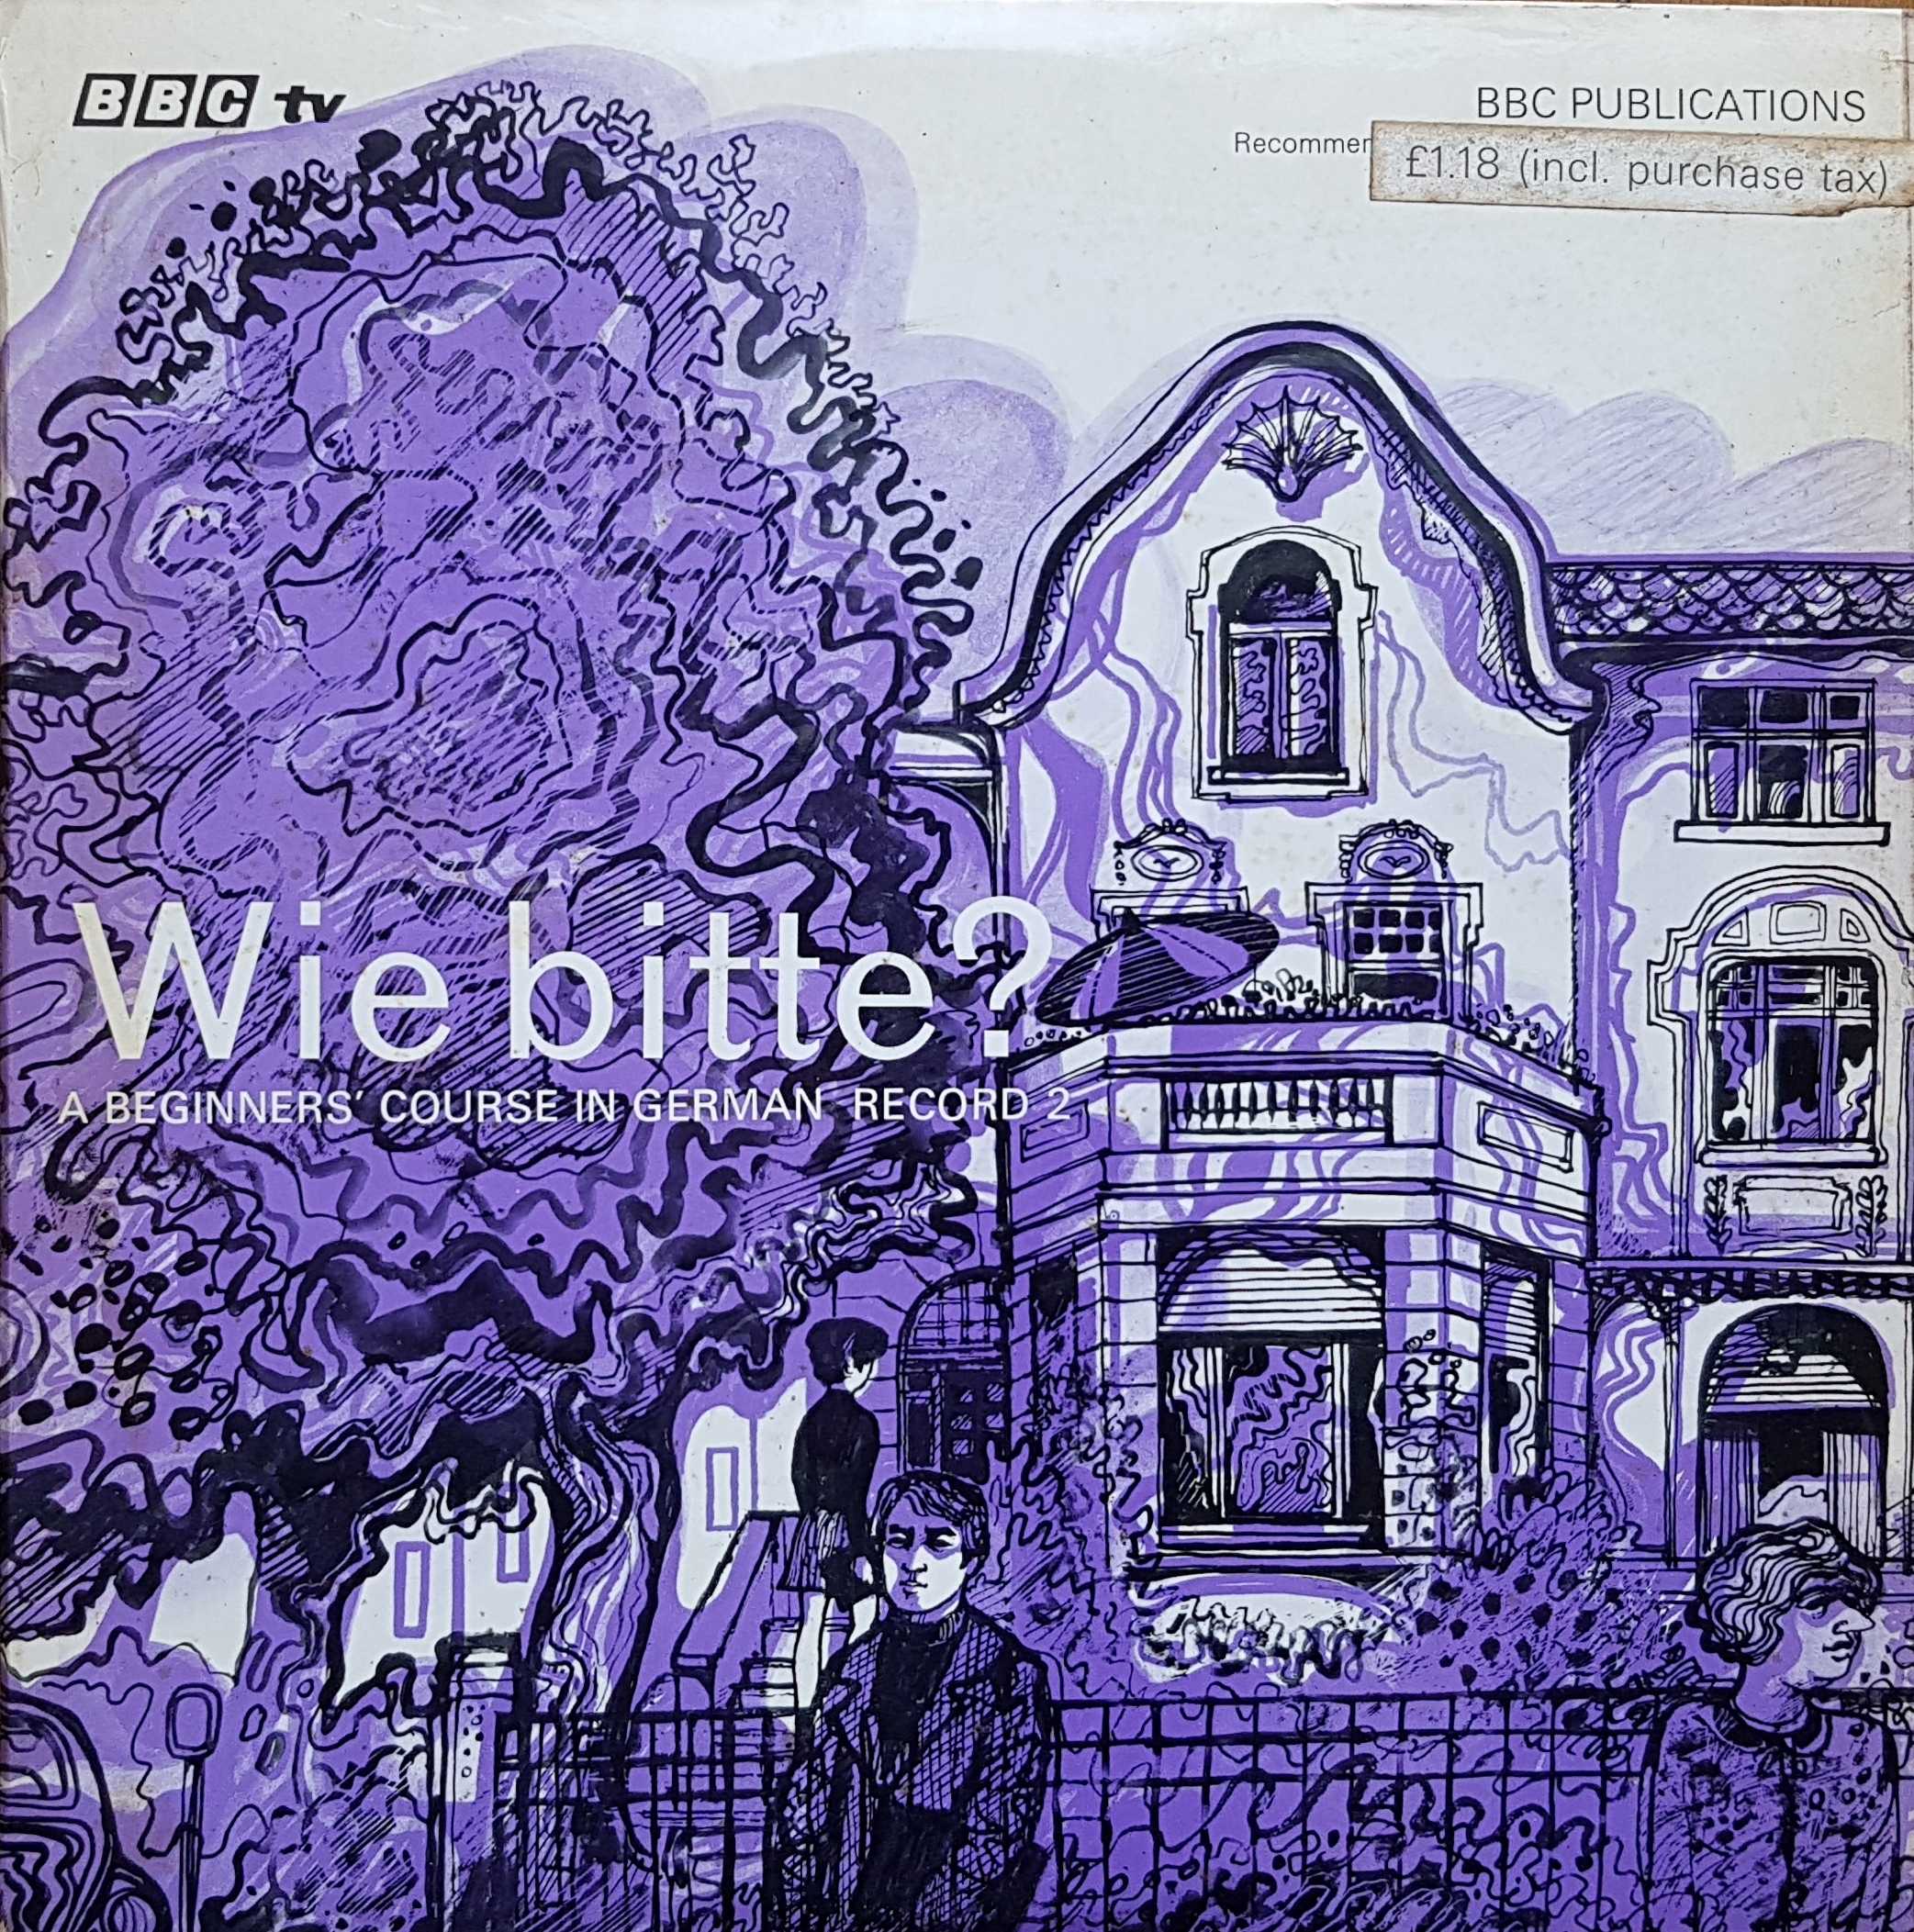 Picture of OP 135/136 Wie bitte? A beginner's course - 2 by artist Milo Sperber / Antony Peck from the BBC albums - Records and Tapes library